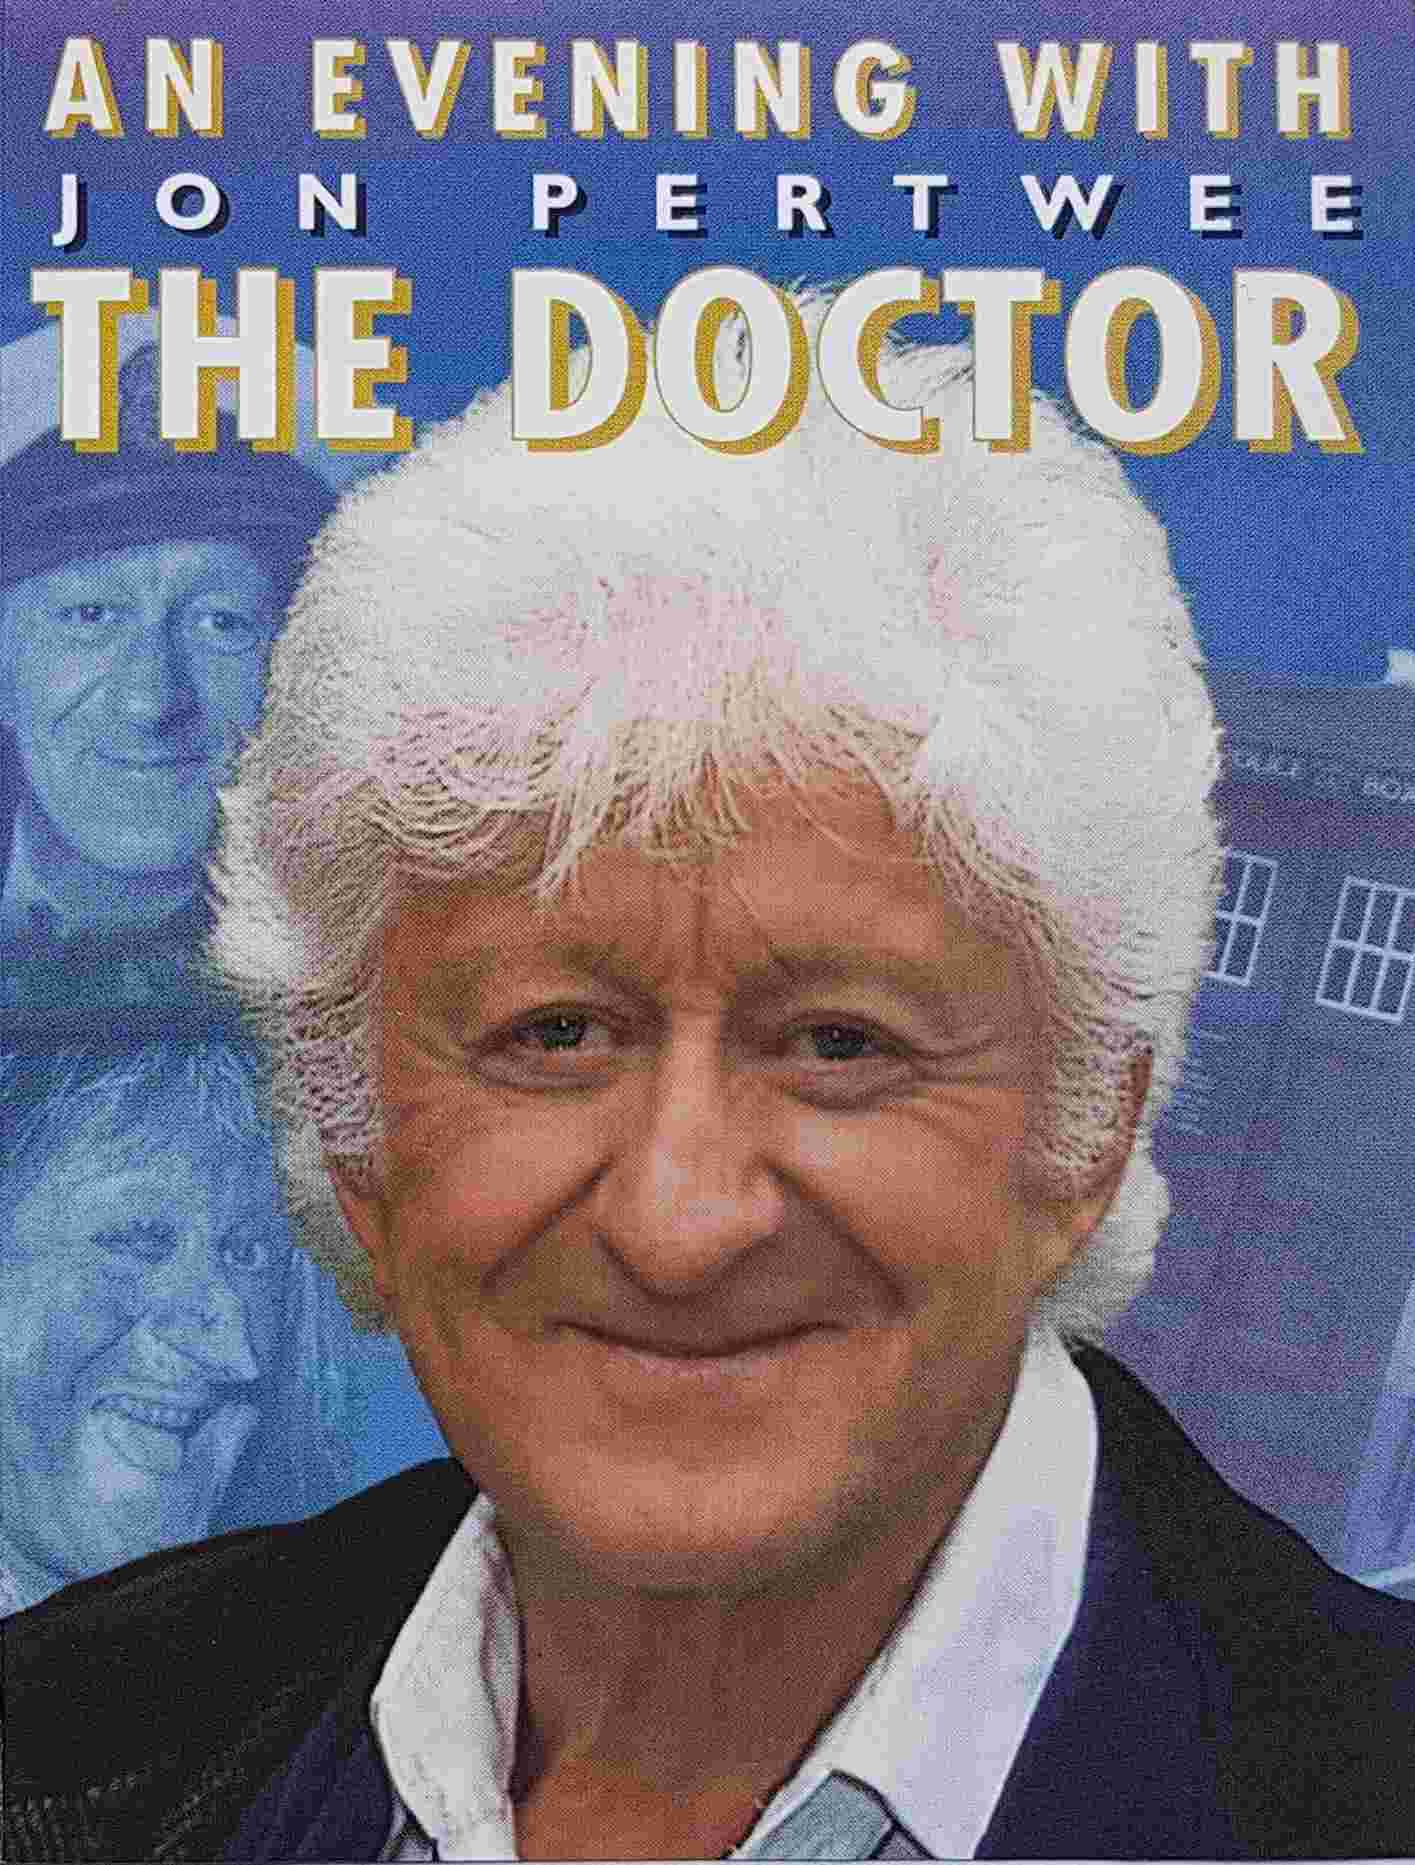 Picture of LFP 7970 An evening with the doctor, a tribute to Jon Pertwee by artist Unknown from ITV, Channel 4 and Channel 5 cassettes library